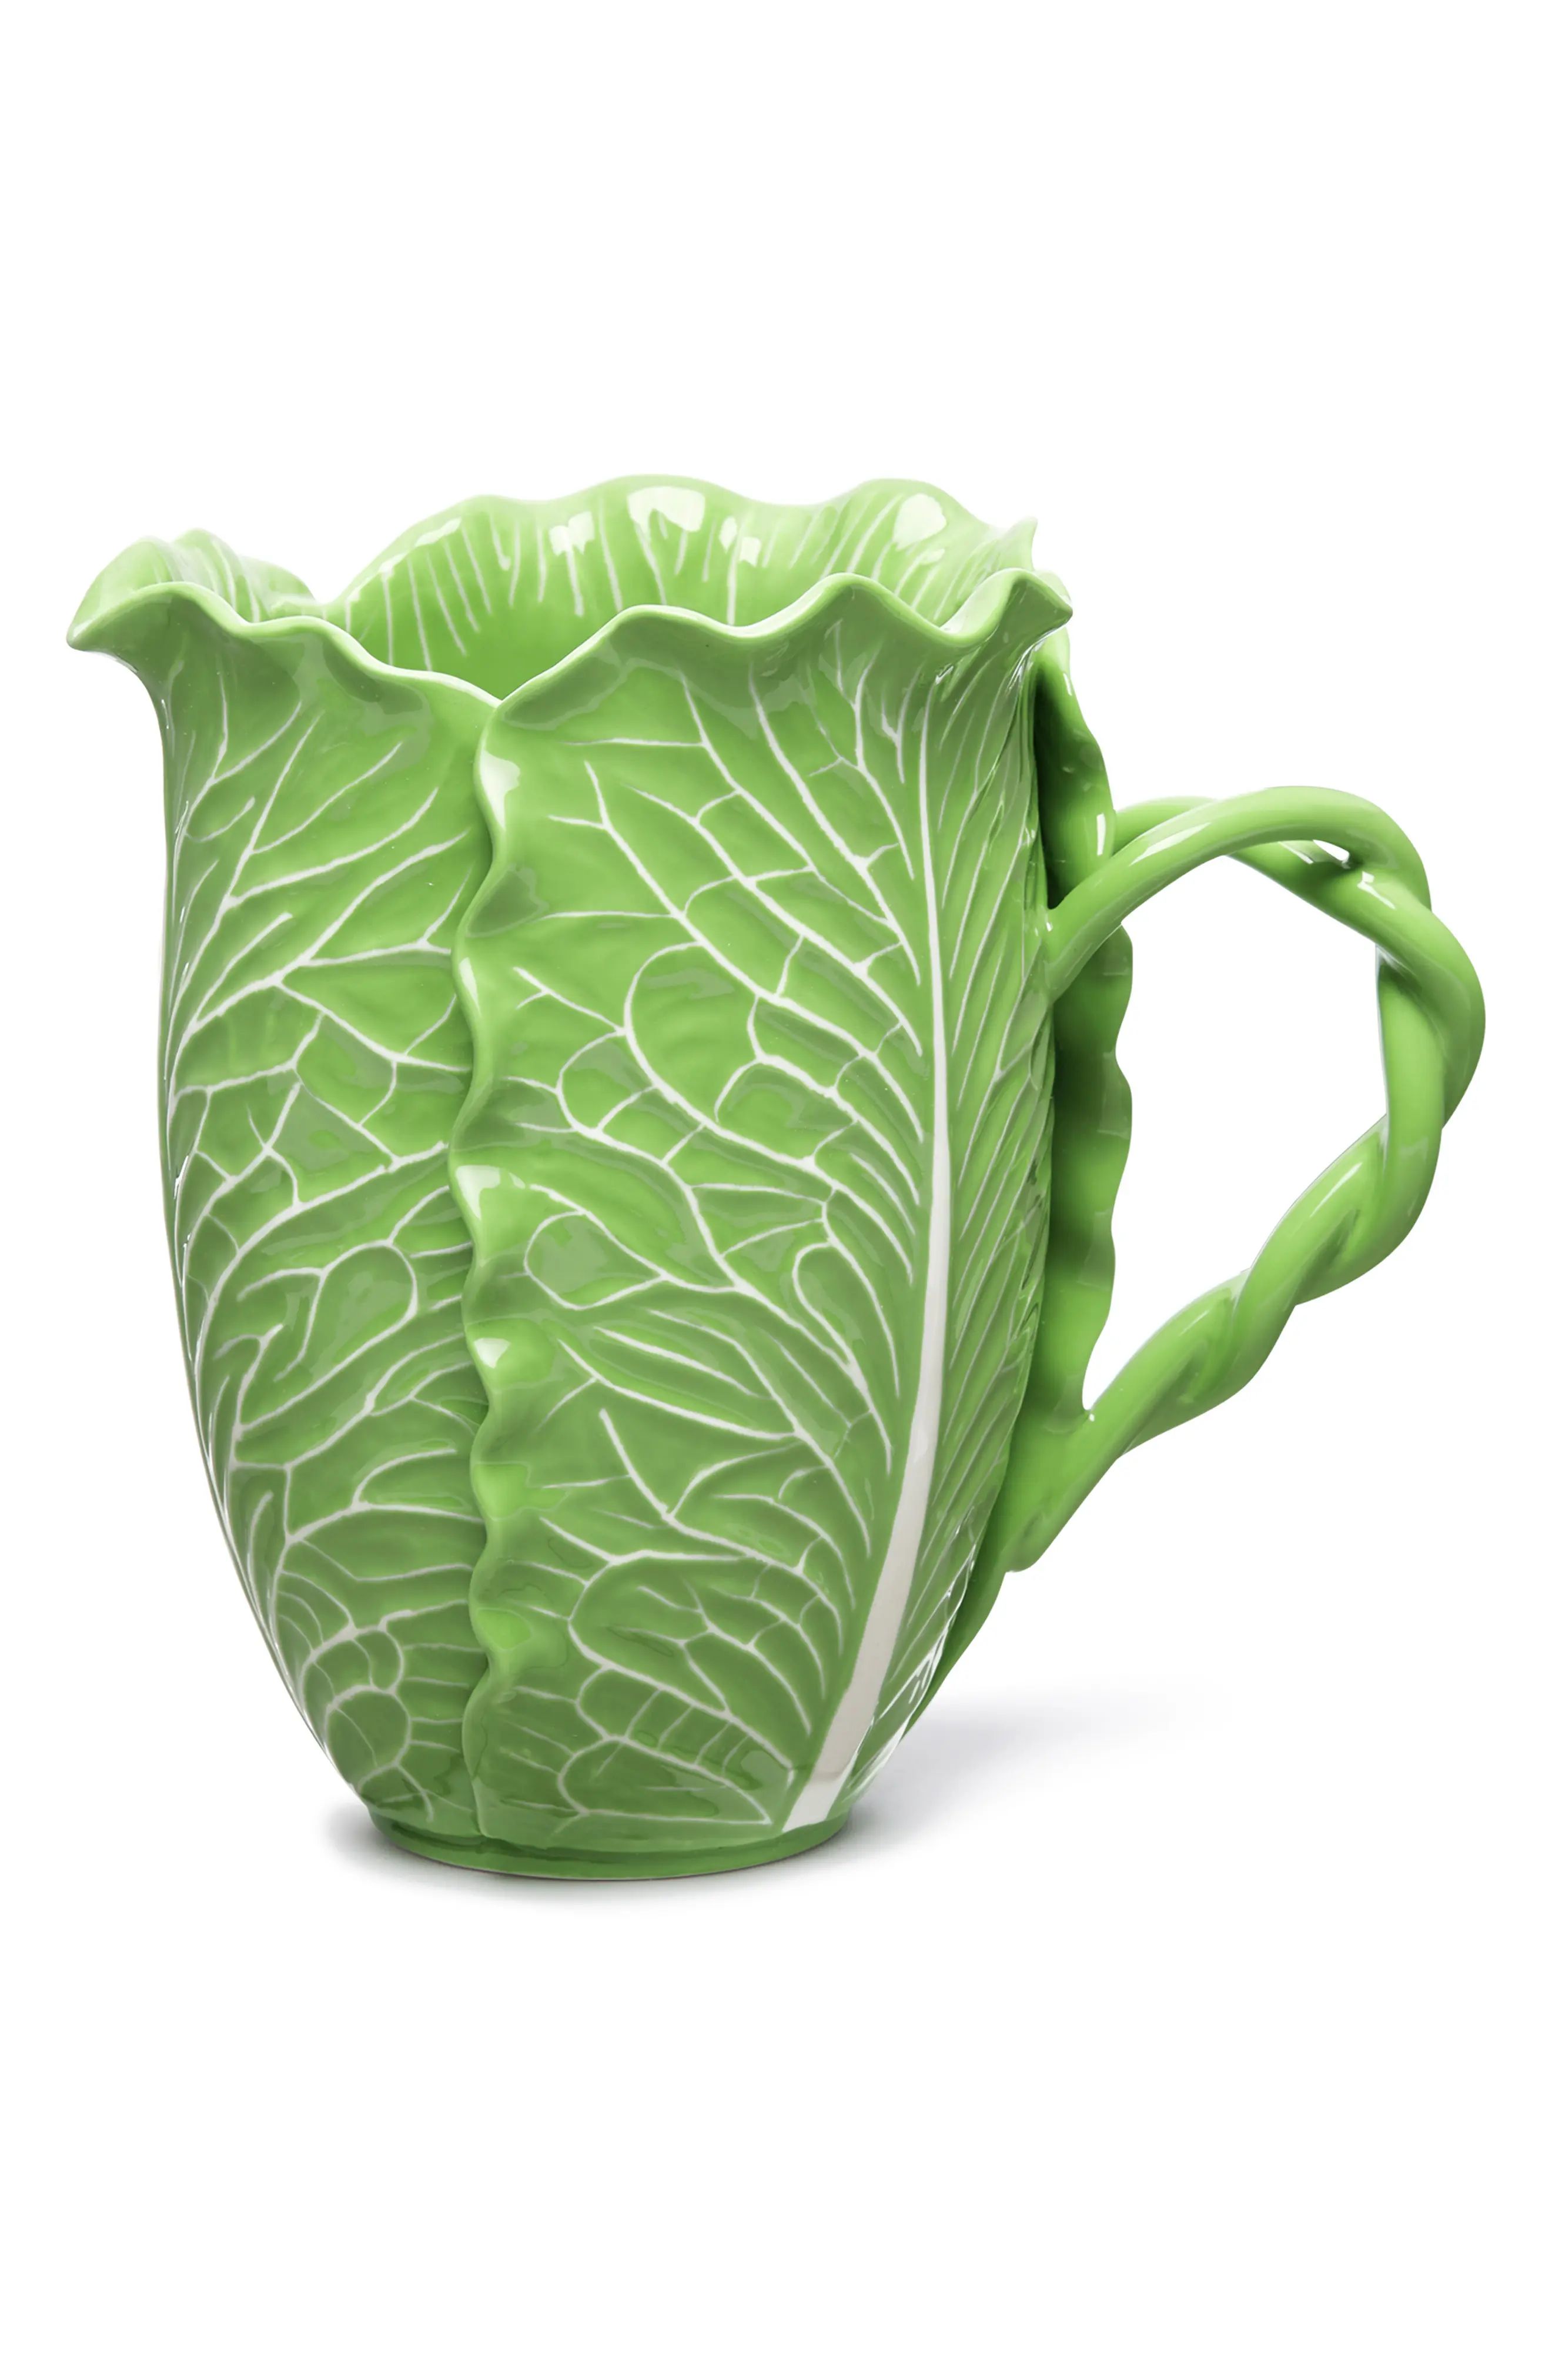 Tory Burch Lettuce Ware Pitcher | Nordstrom